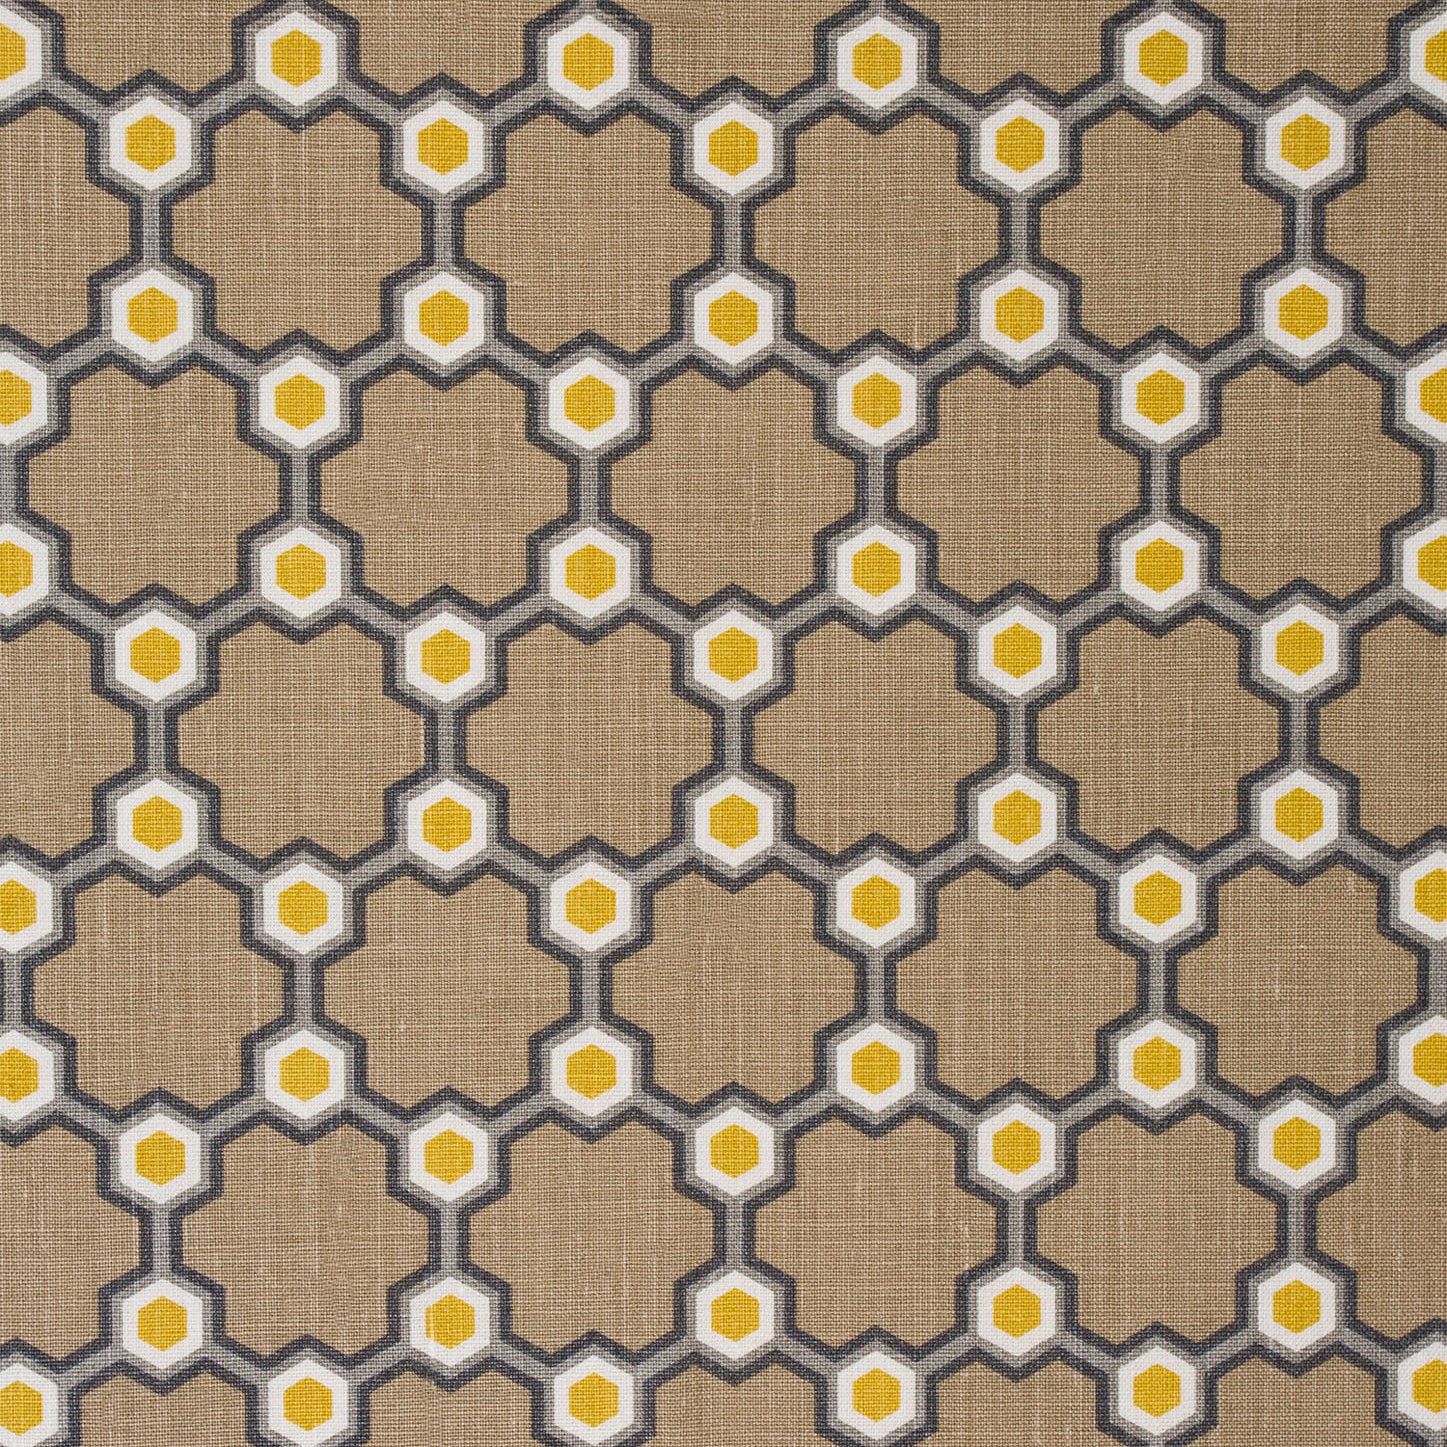 Detail of fabric in a geometric honeycomb pattern in shades of brown, yellow and gray.